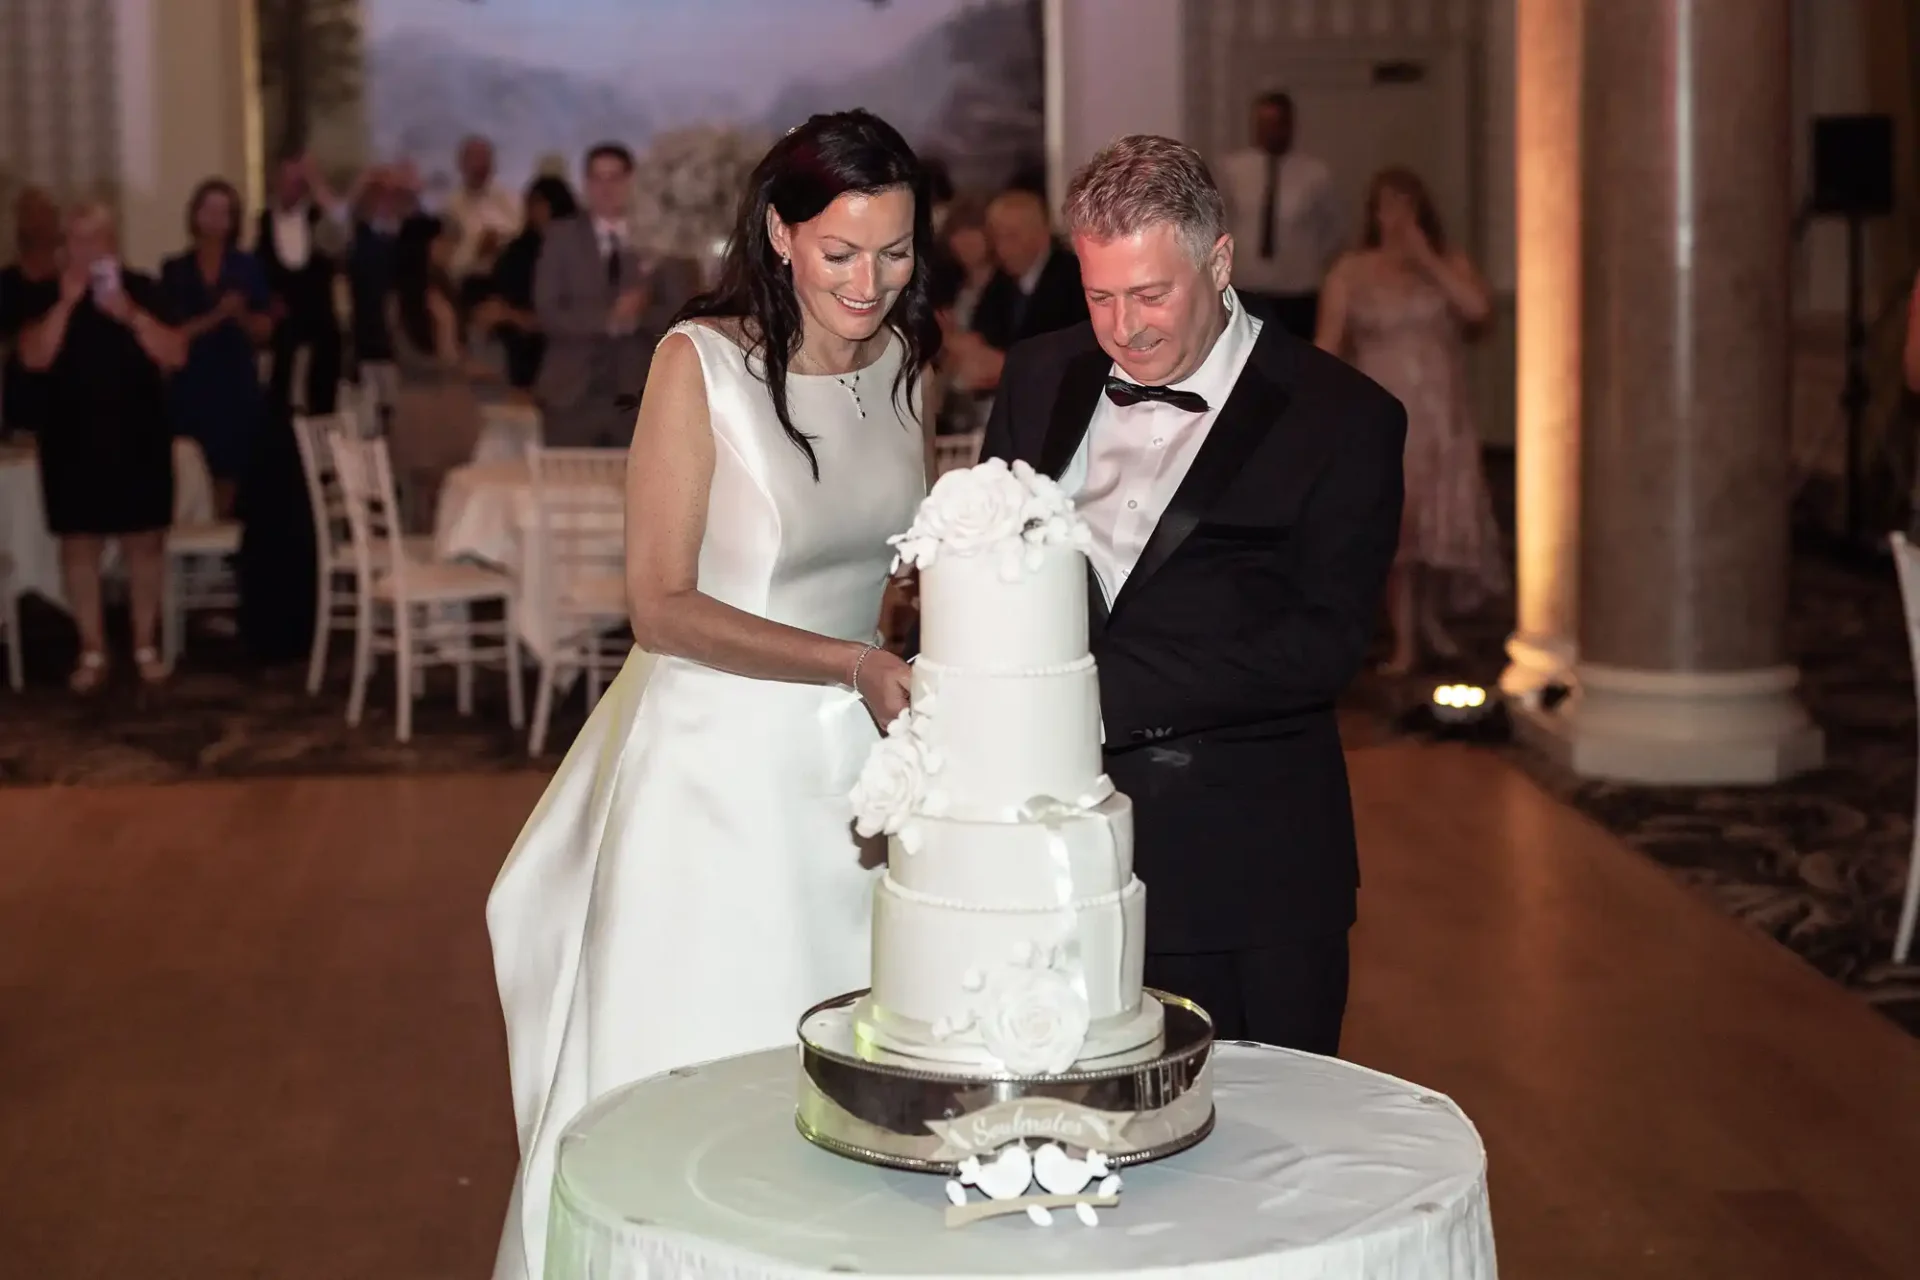 A couple in formal attire smiling as they cut a three-tiered white wedding cake at a reception.